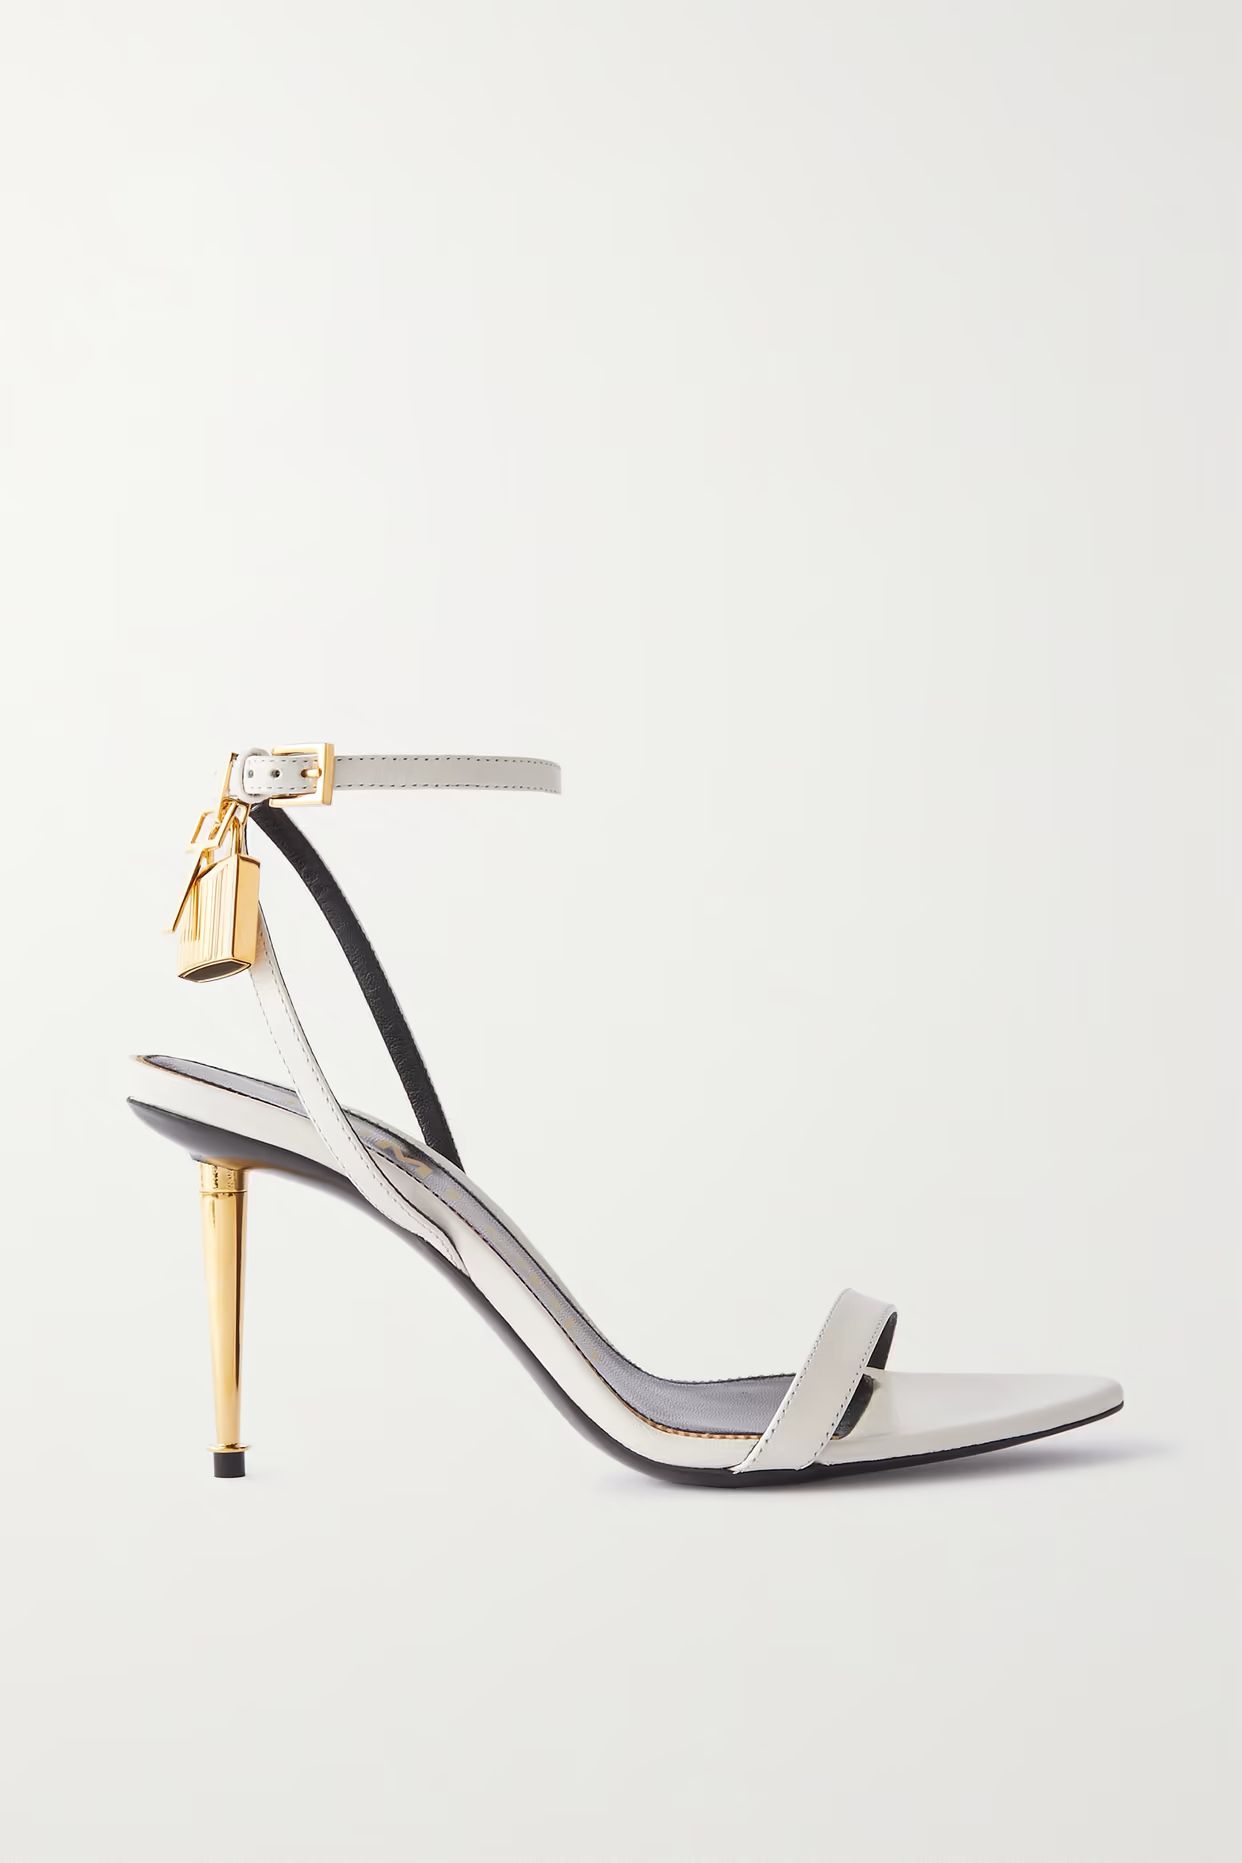 TOM FORD - Padlock Leather Sandals - White | NET-A-PORTER (US)